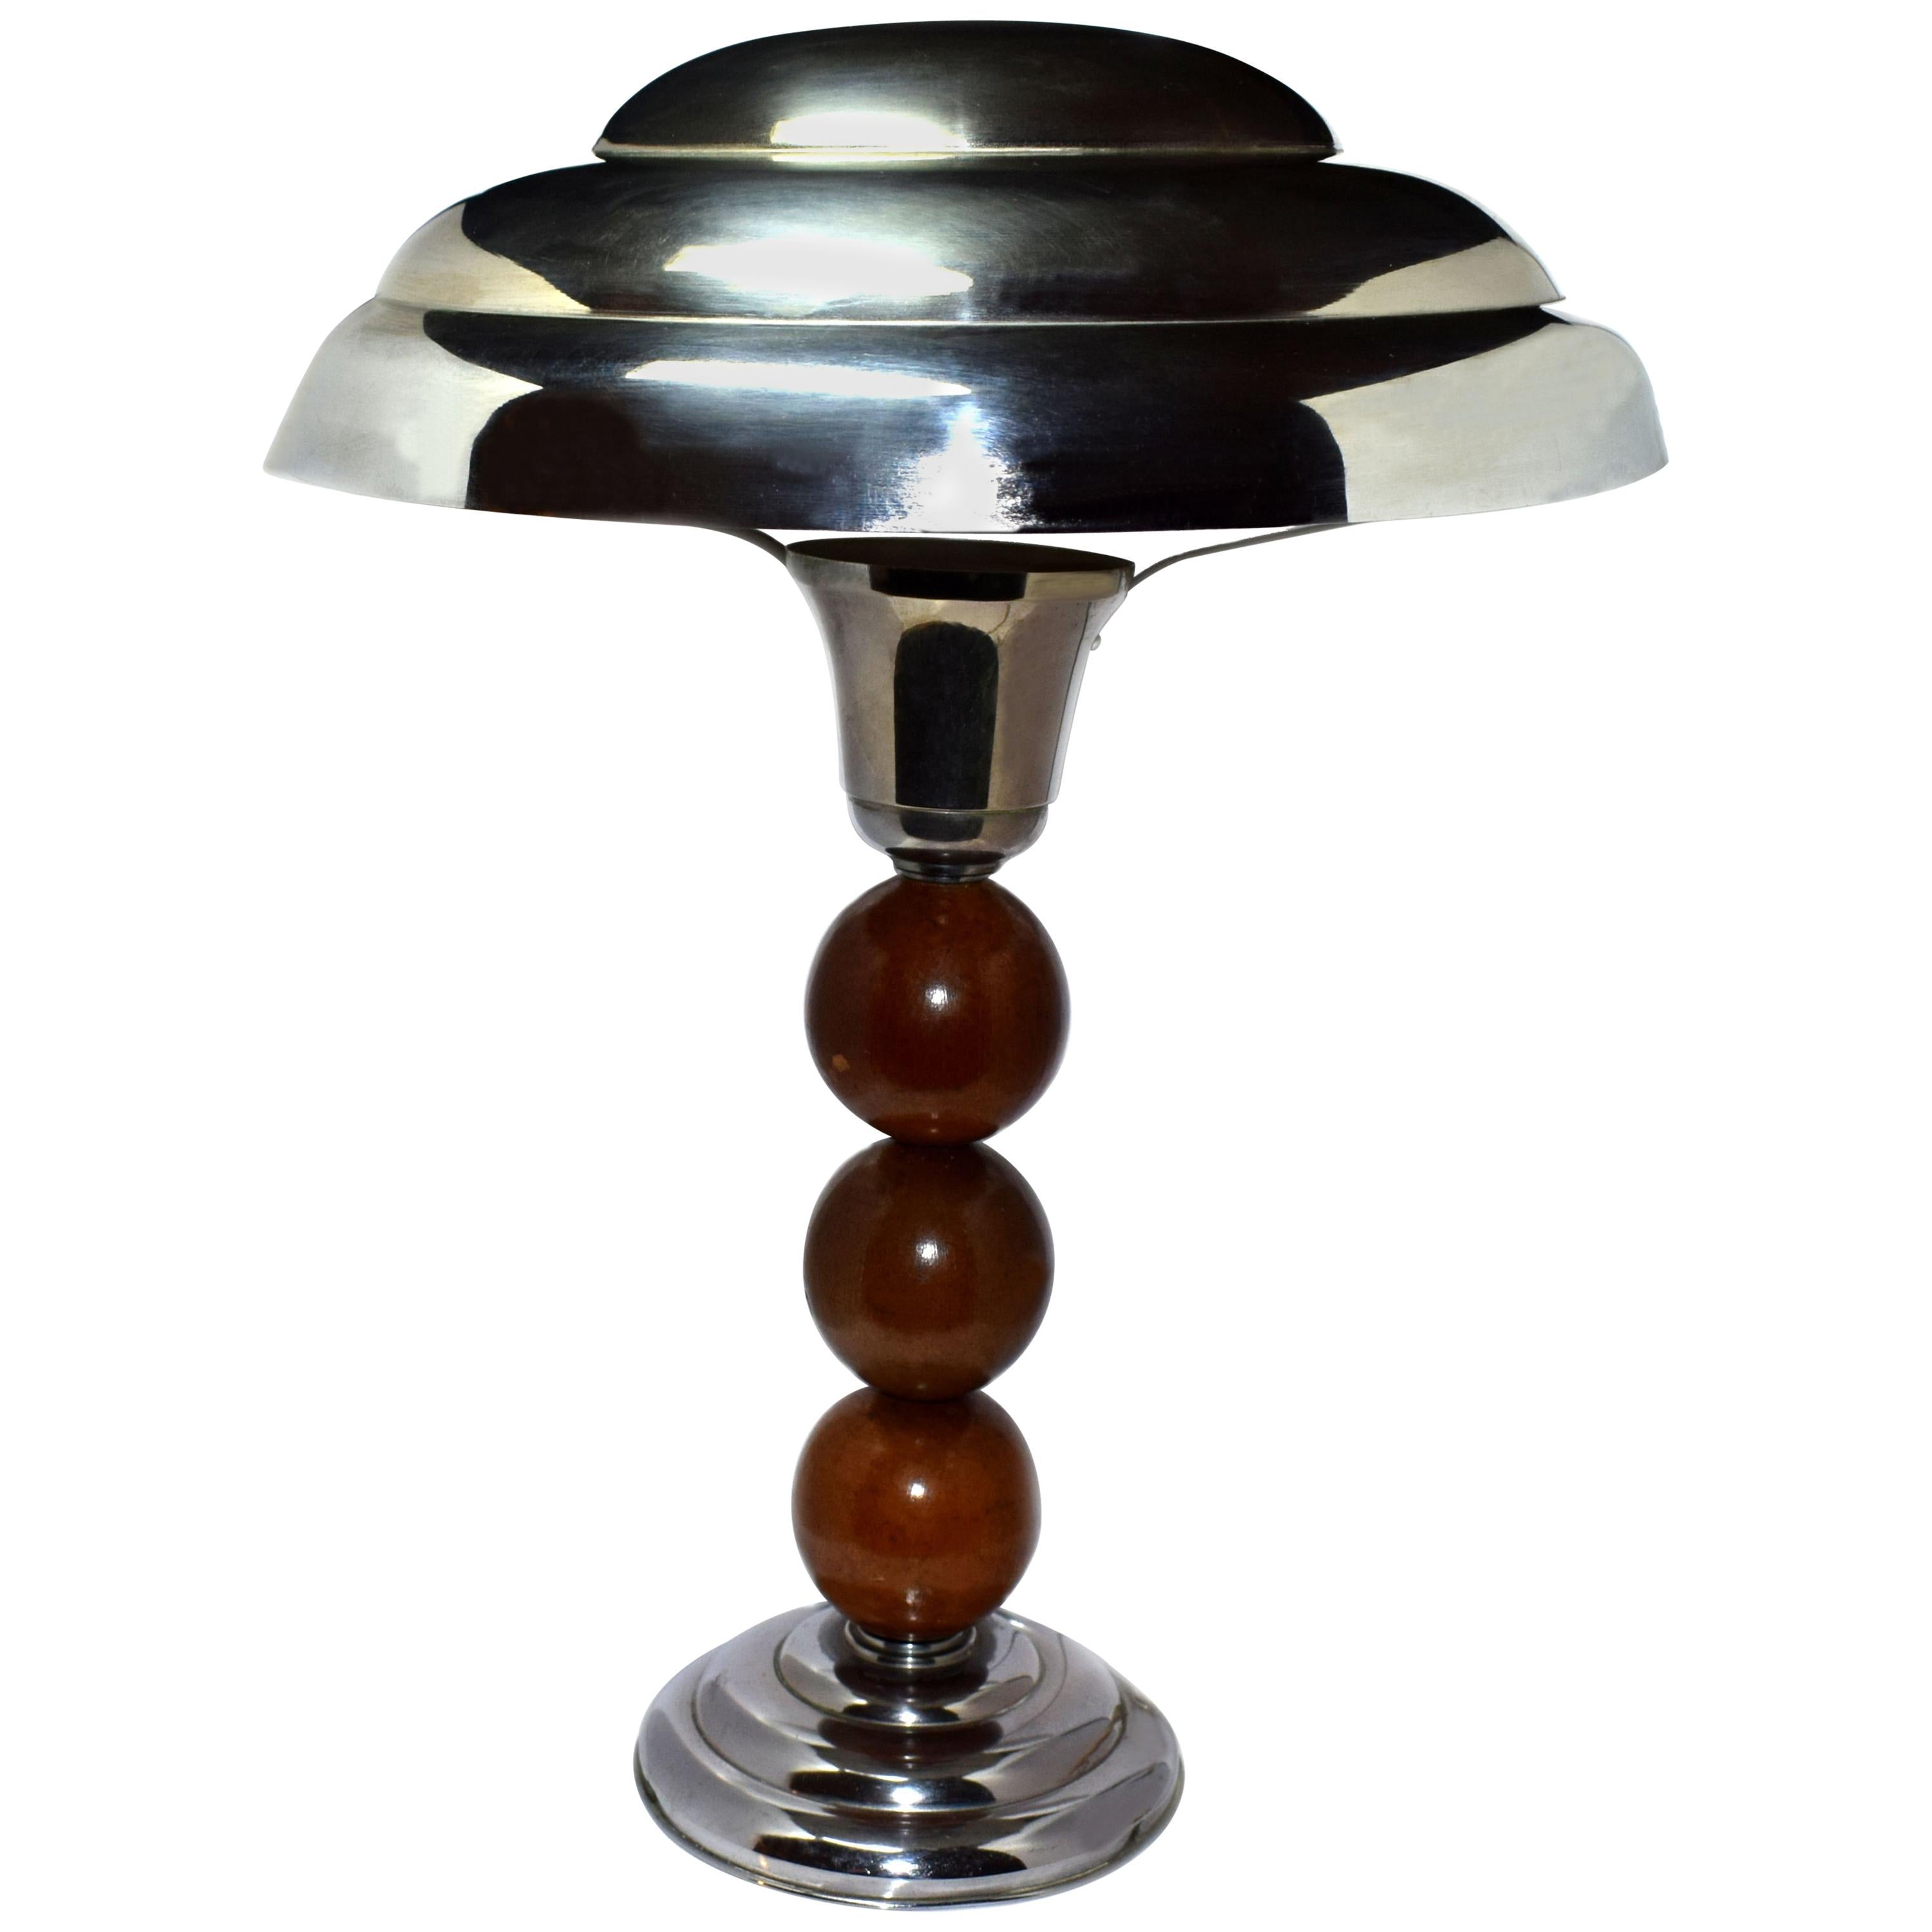 Art Deco 1930s Modernist Table Lamp in Chrome and Wood